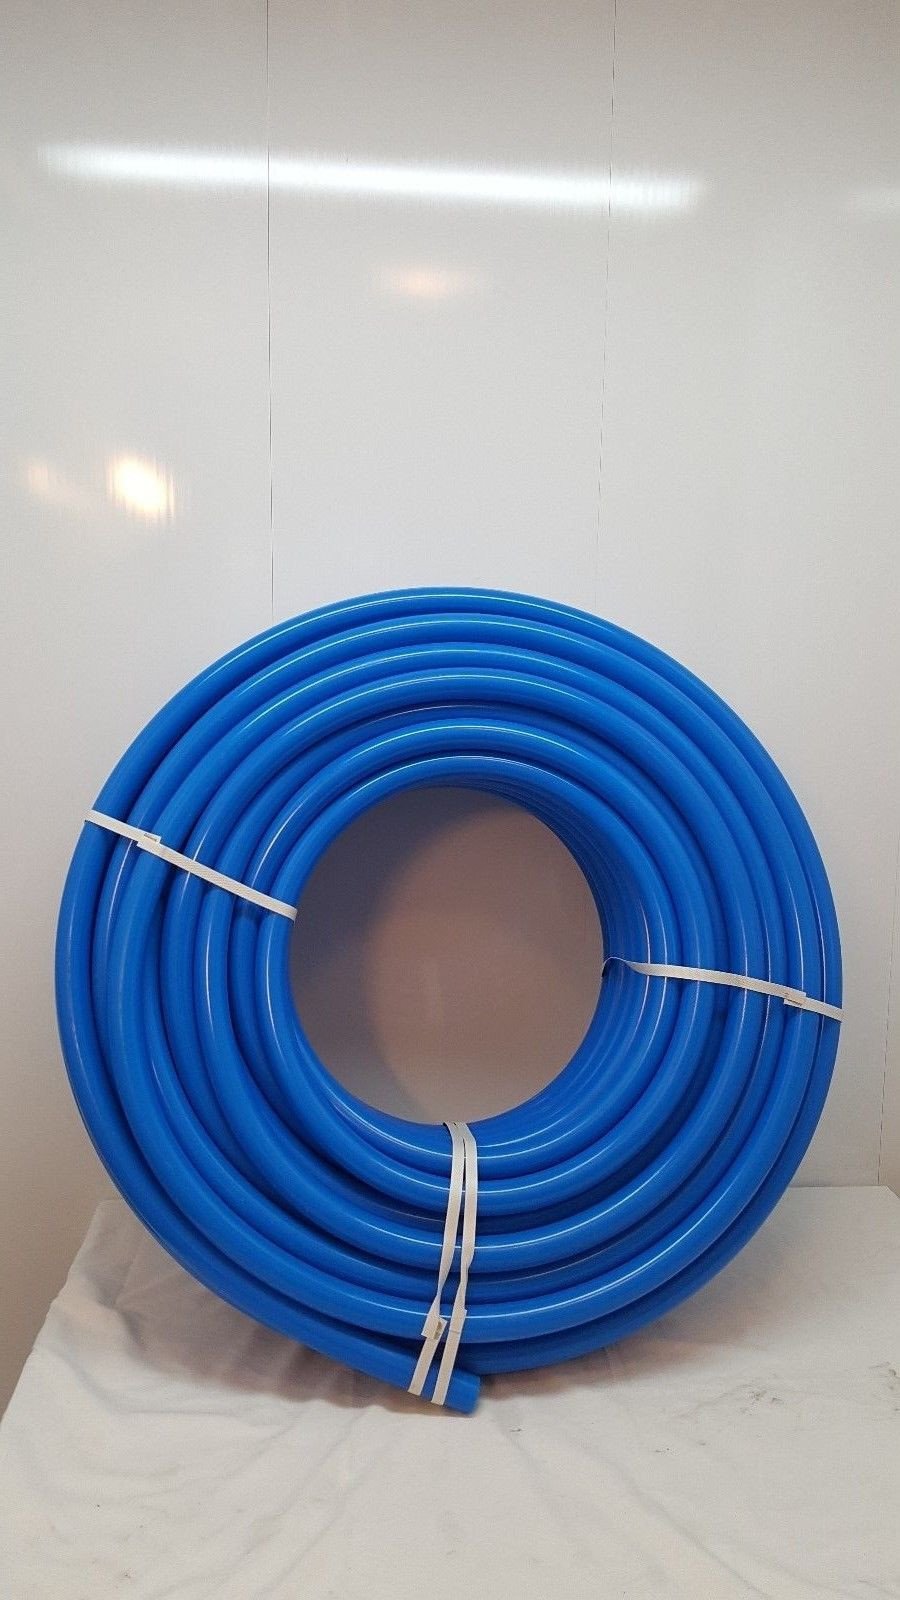 1 1/2" Non Oxygen Barrier Blue PEX tubing for heating and plumbing